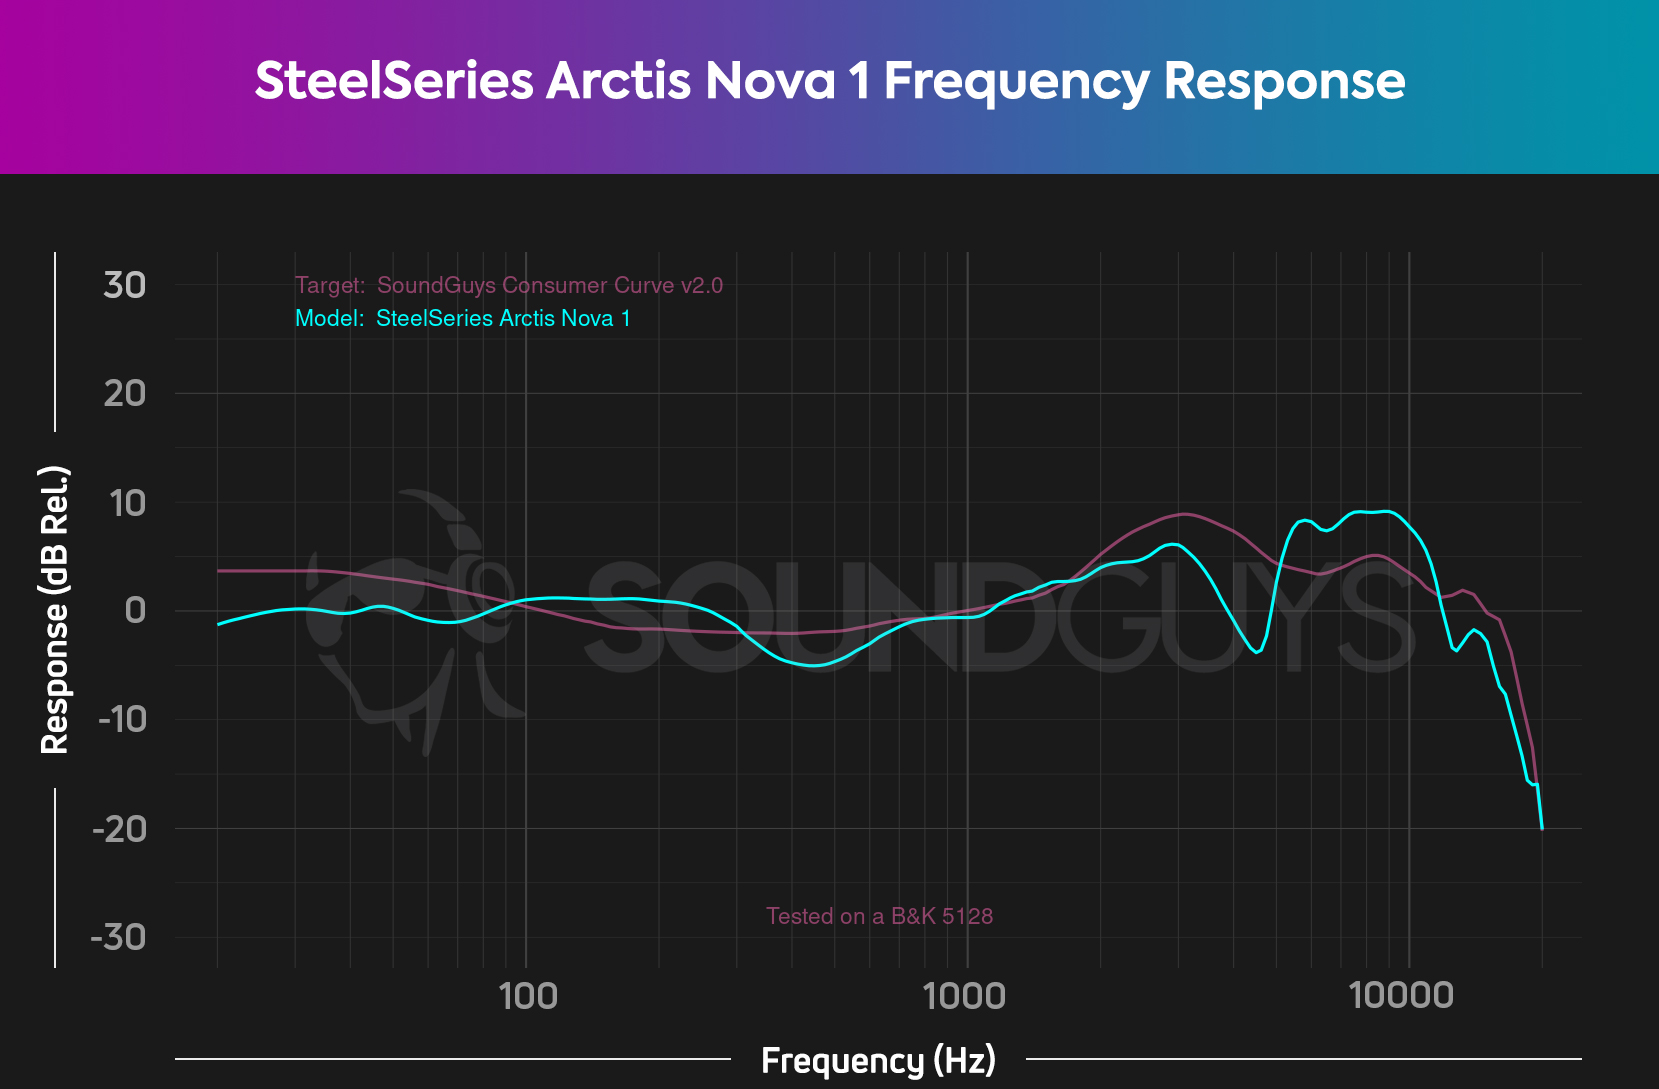 The SteelSeries Arctis Nova 1 frequency response curve showing a fairly flat response up to the high end where there is some deviation from the ideal curve.